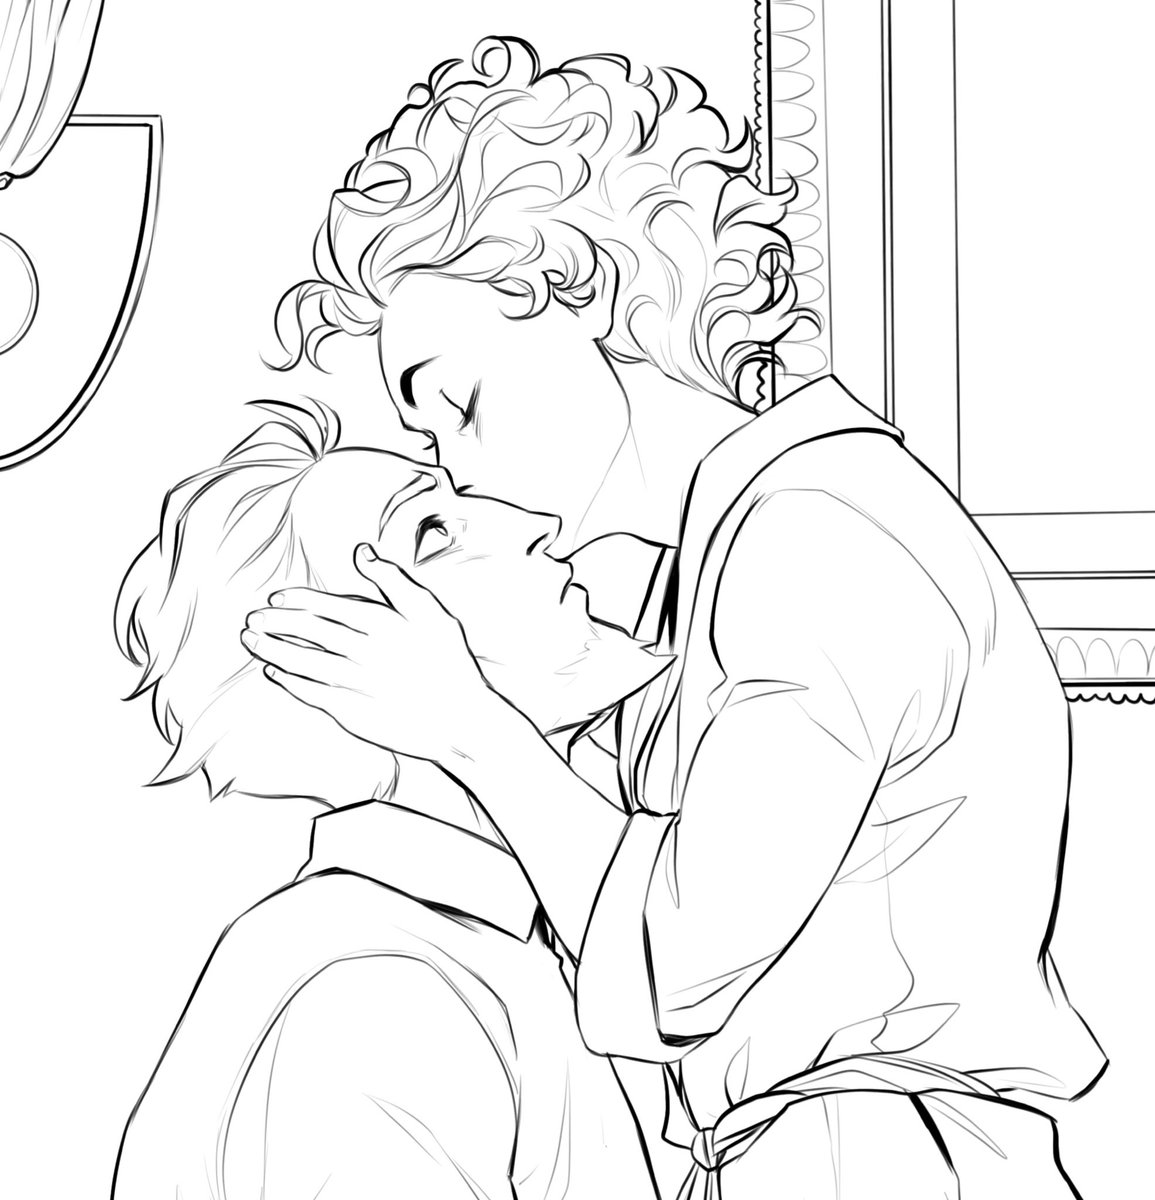 Drawing another The mirror visitor artwork cause Ophelia and Thorn are my new book otp 